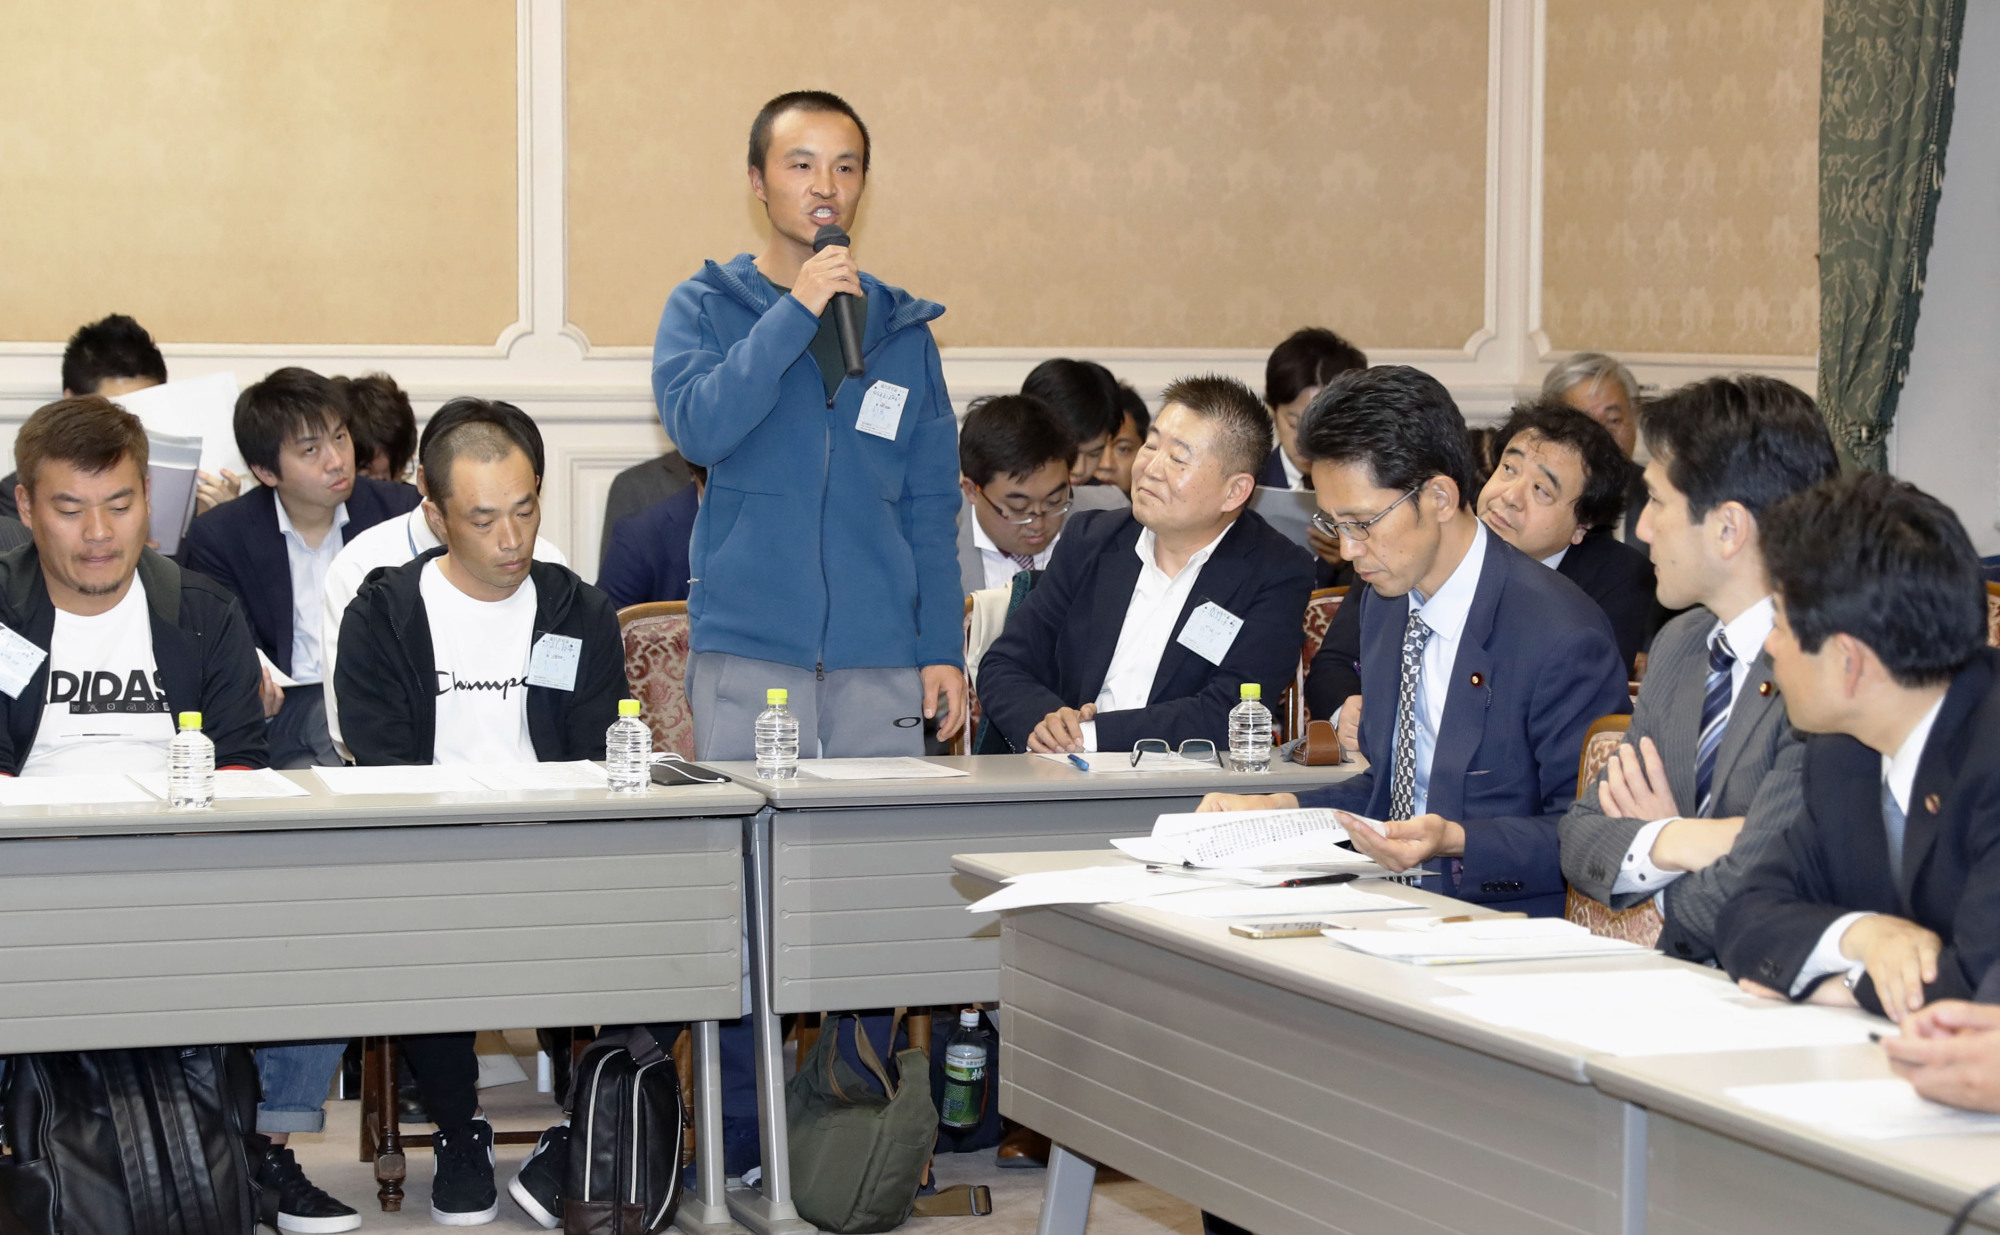 A foreign trainee speaks during a session organized by lawmakers of opposition parties in November at the Diet. | KYODO